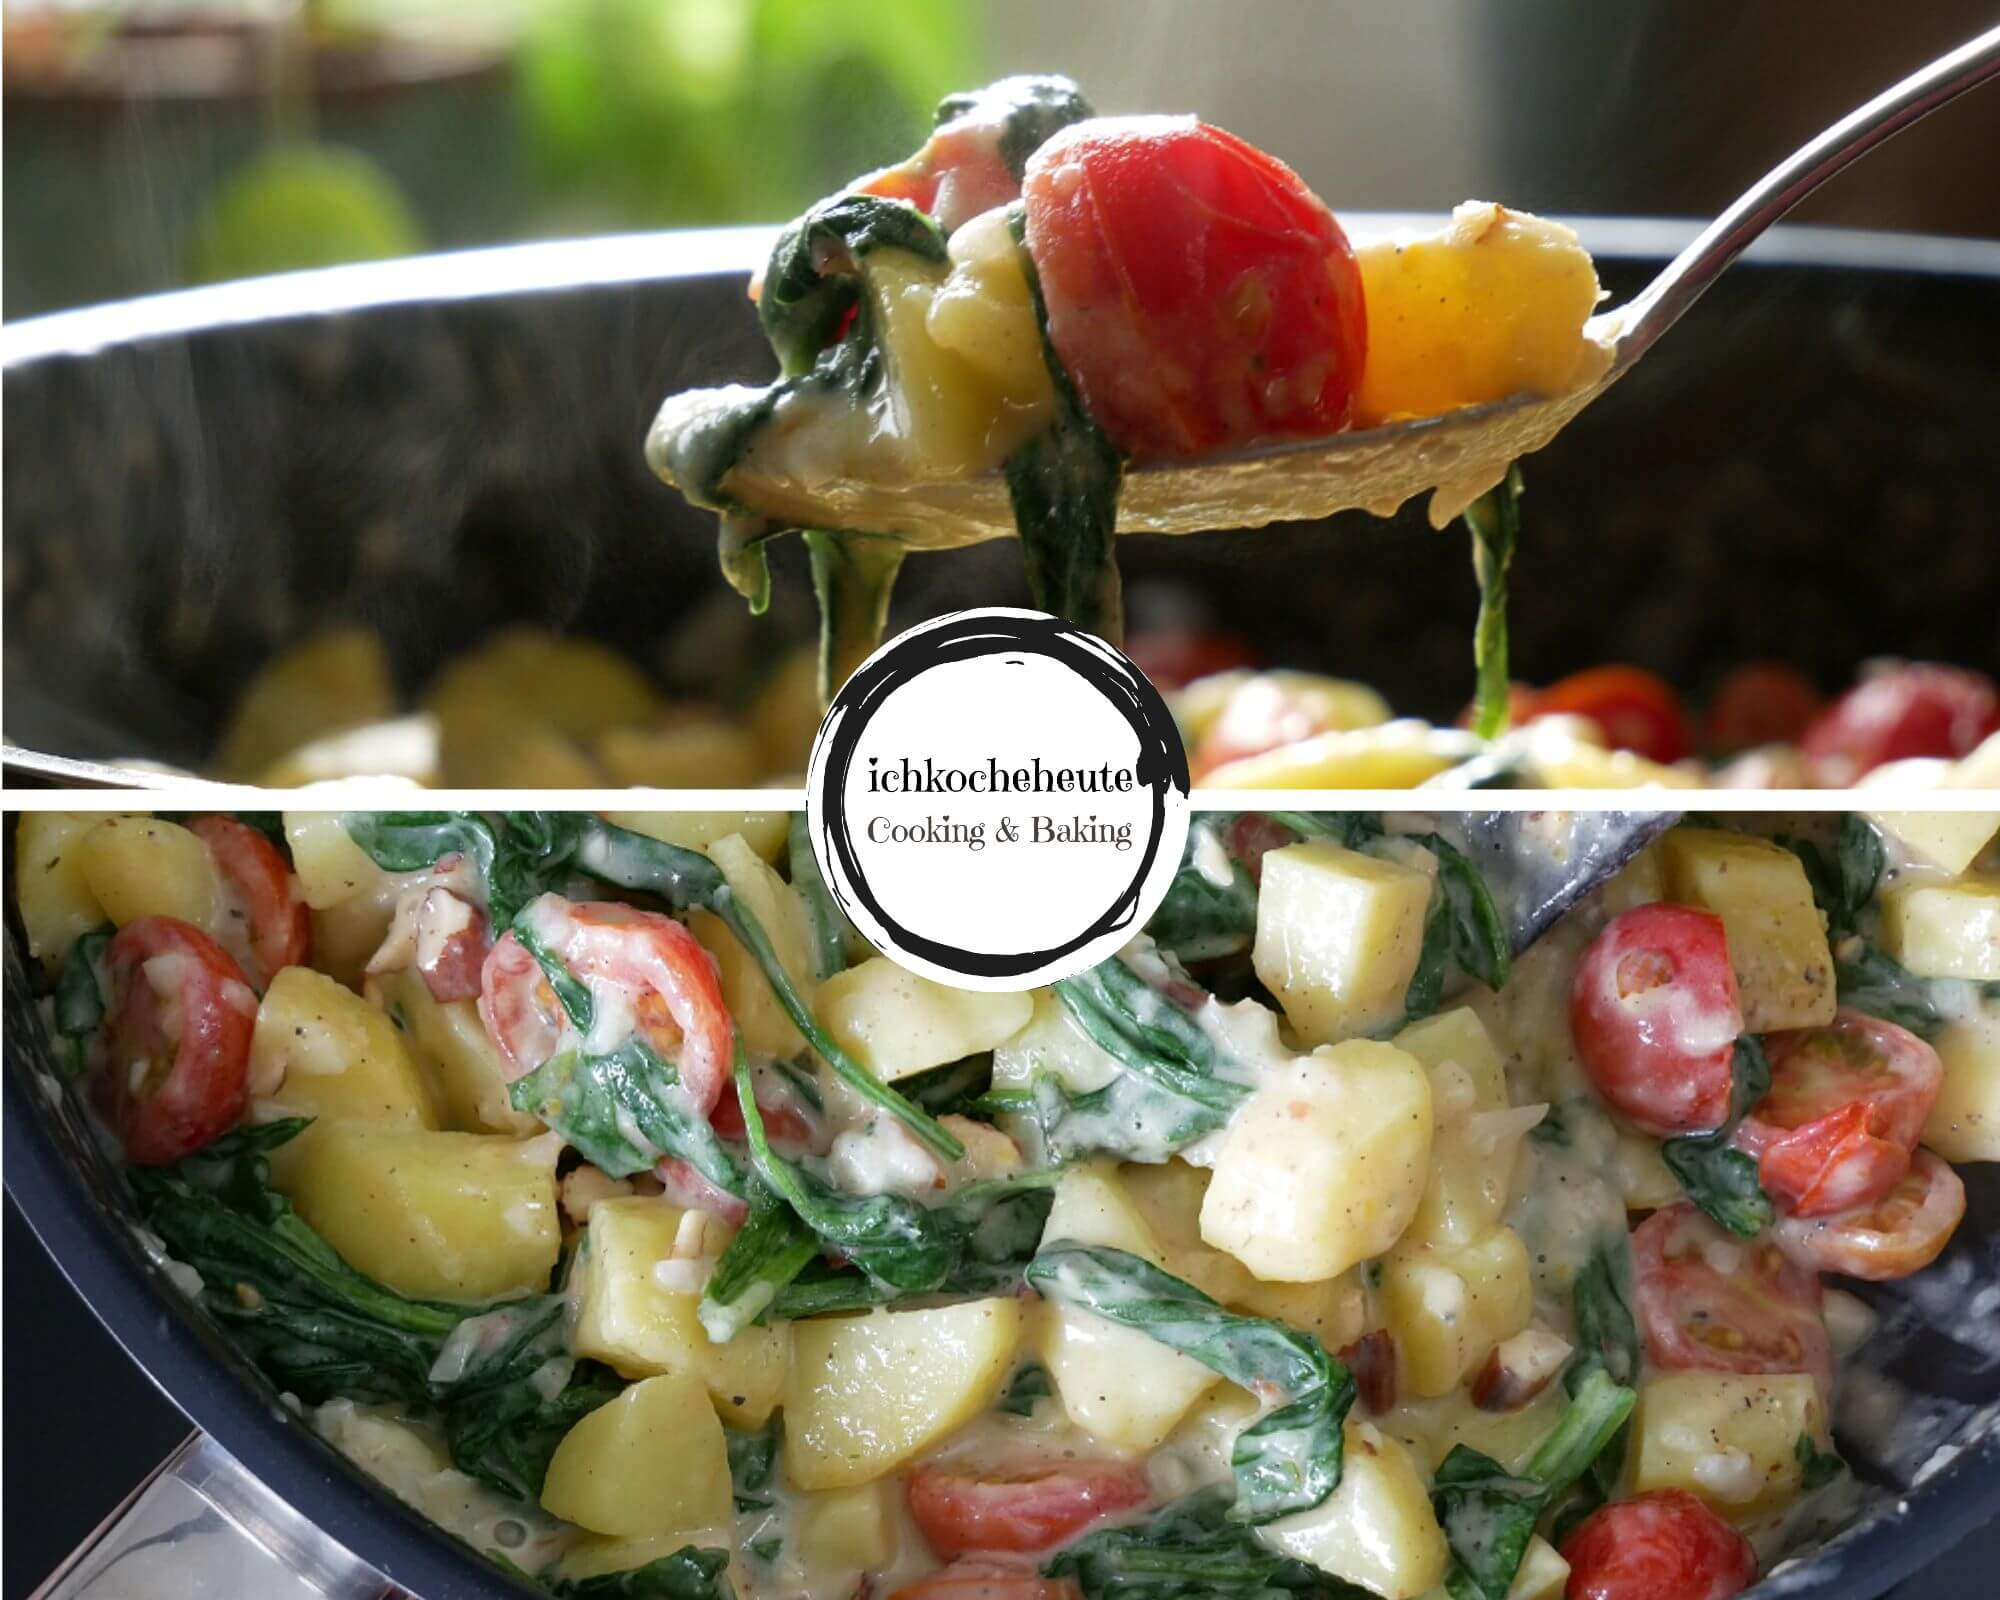 Serving Creamy Potatoes with Spinach & Tomatoes